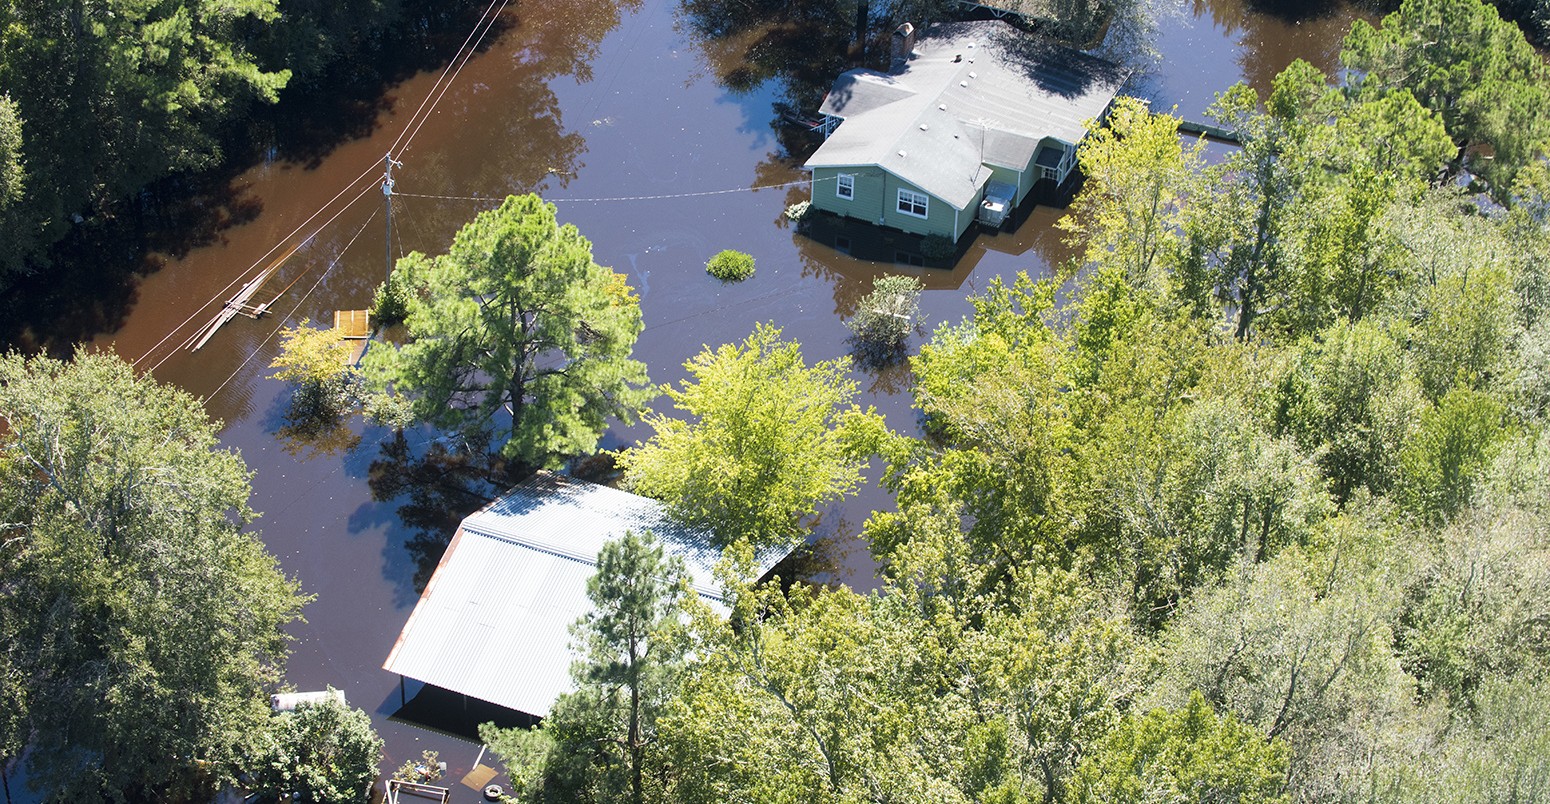 Coast Guard continue assistance efforts in flooded South Carolina